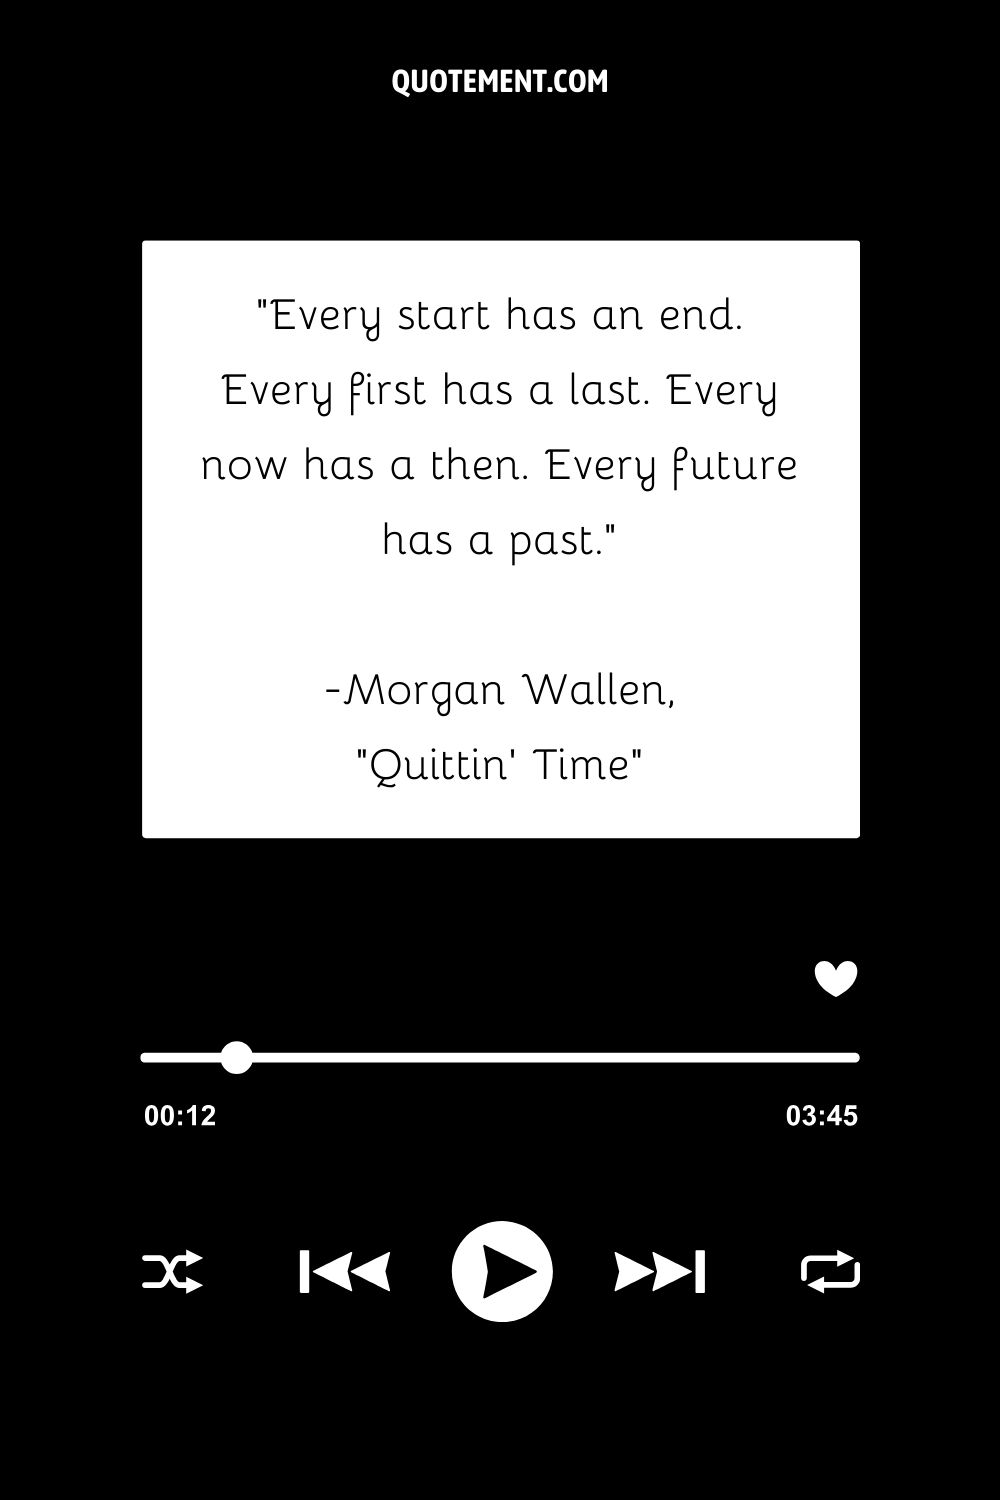 “Every start has an end. Every first has a last. Every now has a then. Every future has a past.” — Morgan Wallen, “Quittin’ Time”